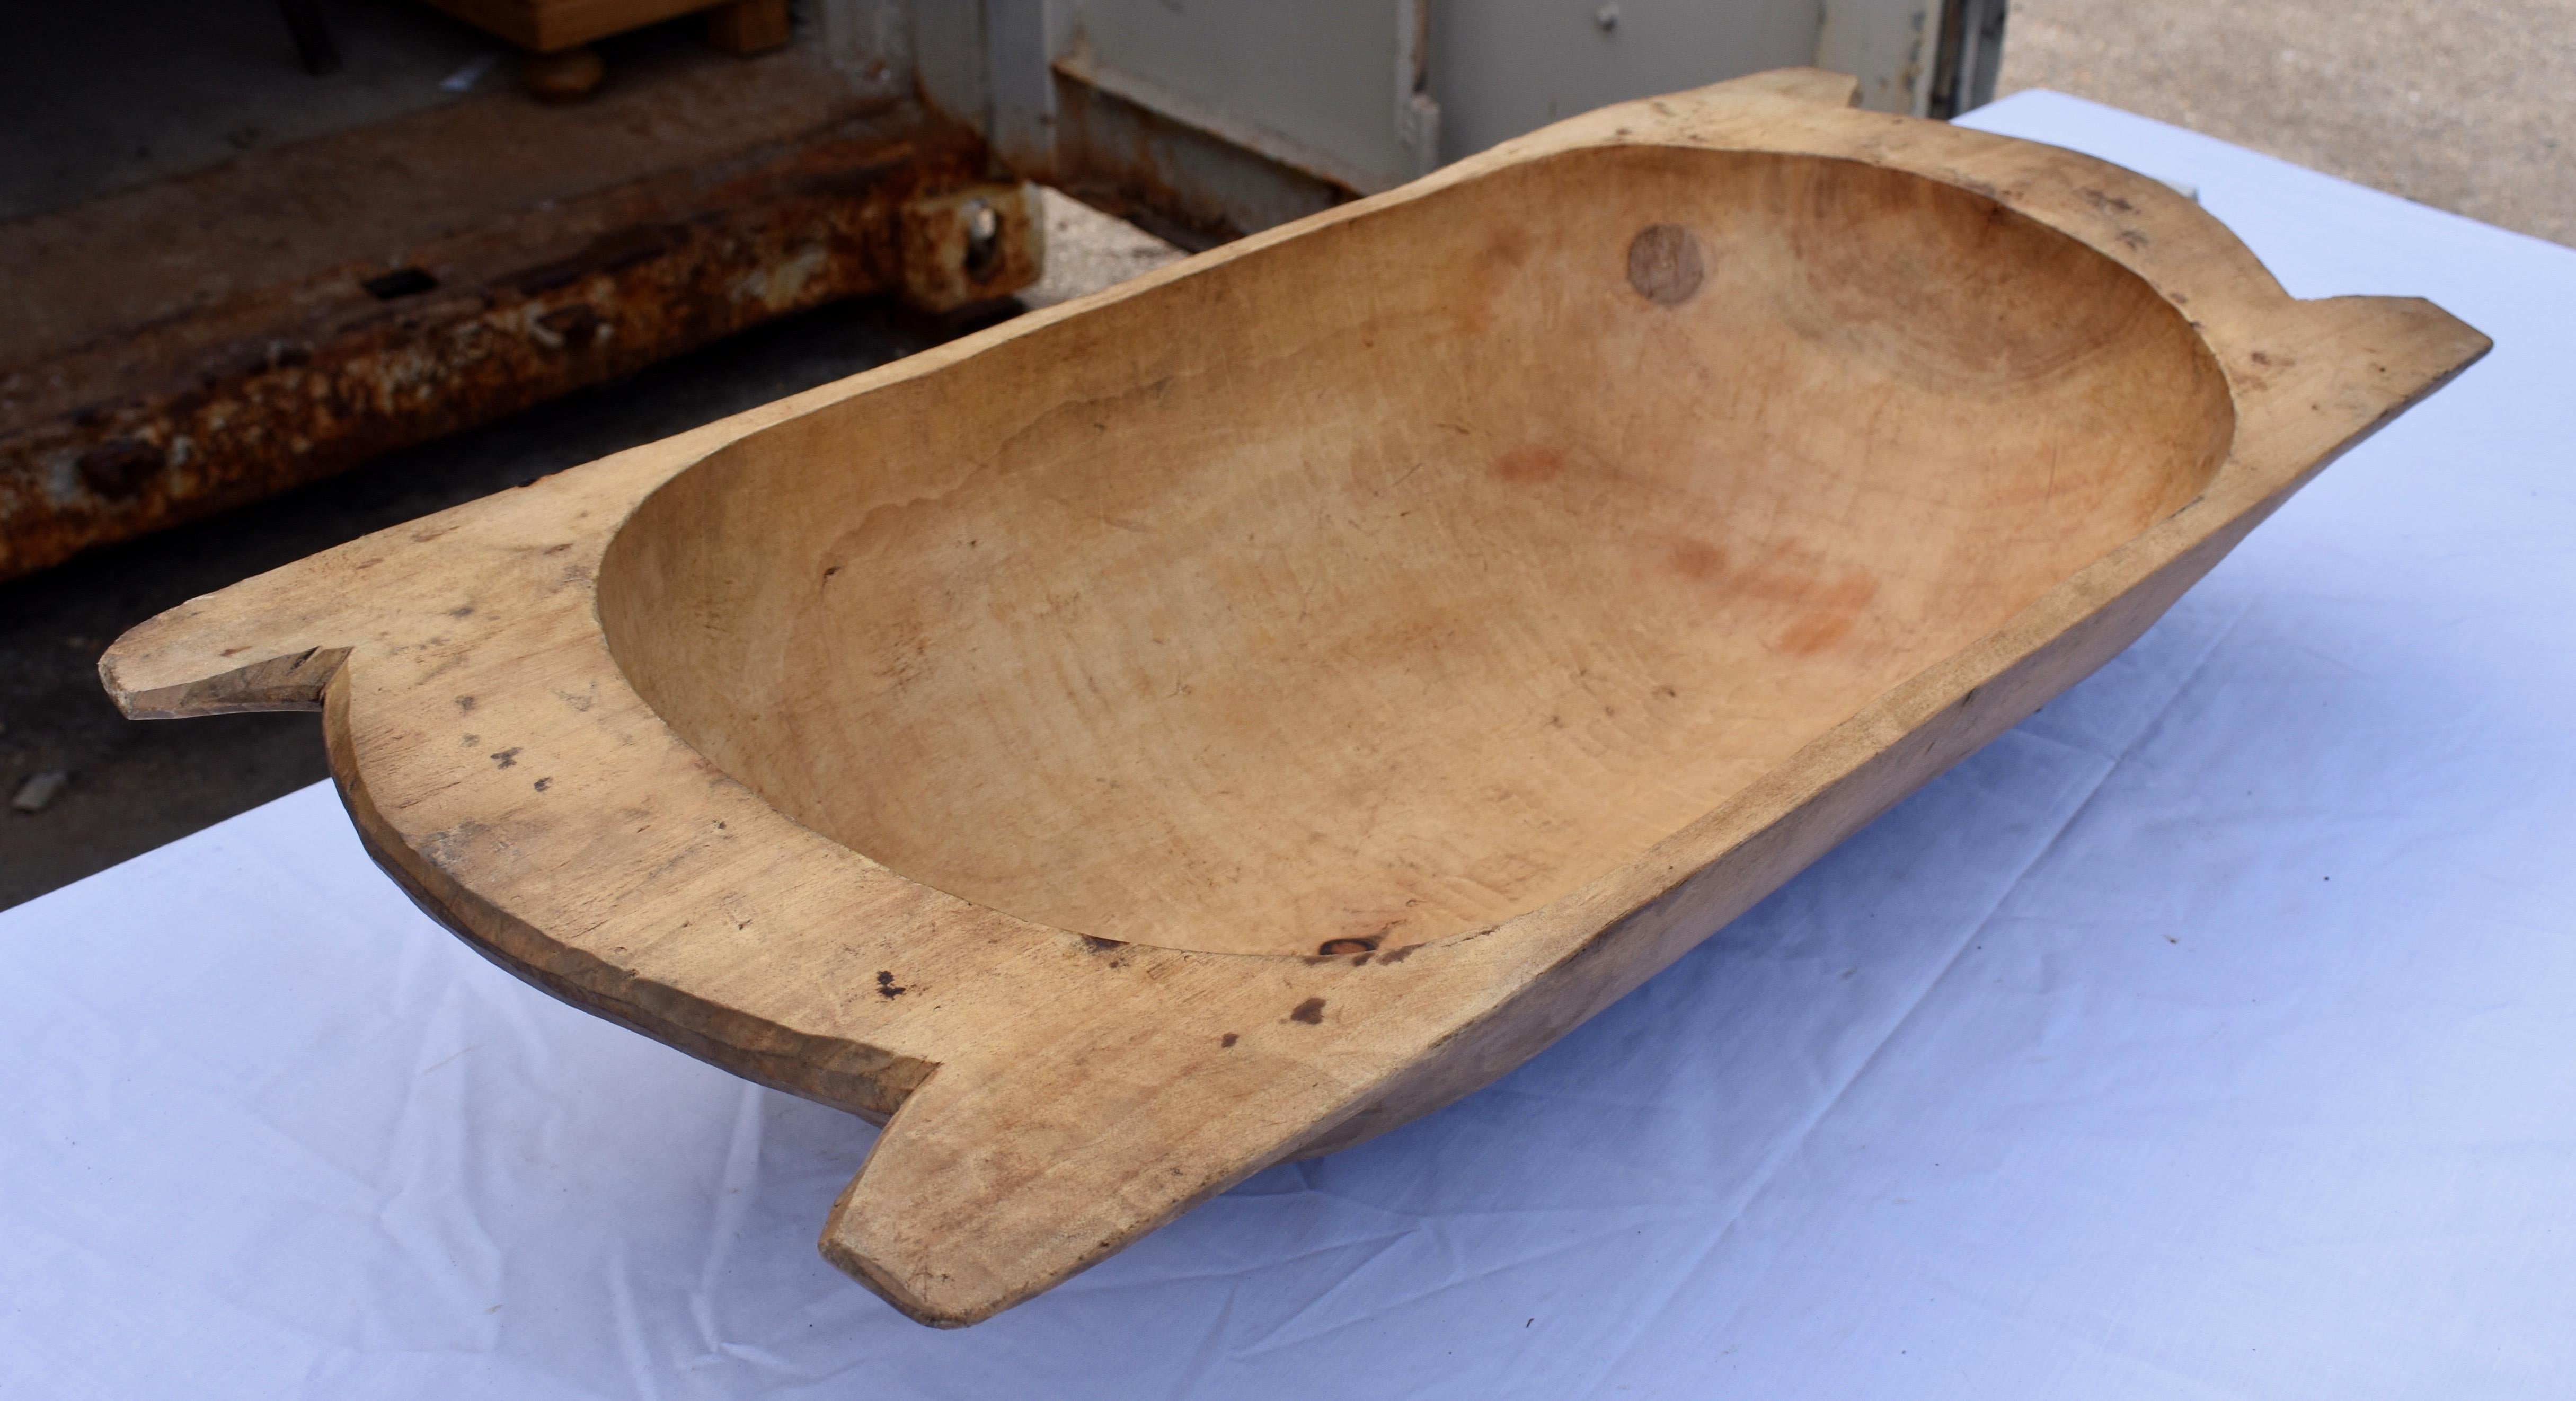 Our European antique wooden dough bowls or trogs were hand-hewn from whole split logs. They feature remarkable handiwork and a beautiful patina, especially when viewed from the underside. They all show signs of purposeful use. Some have small